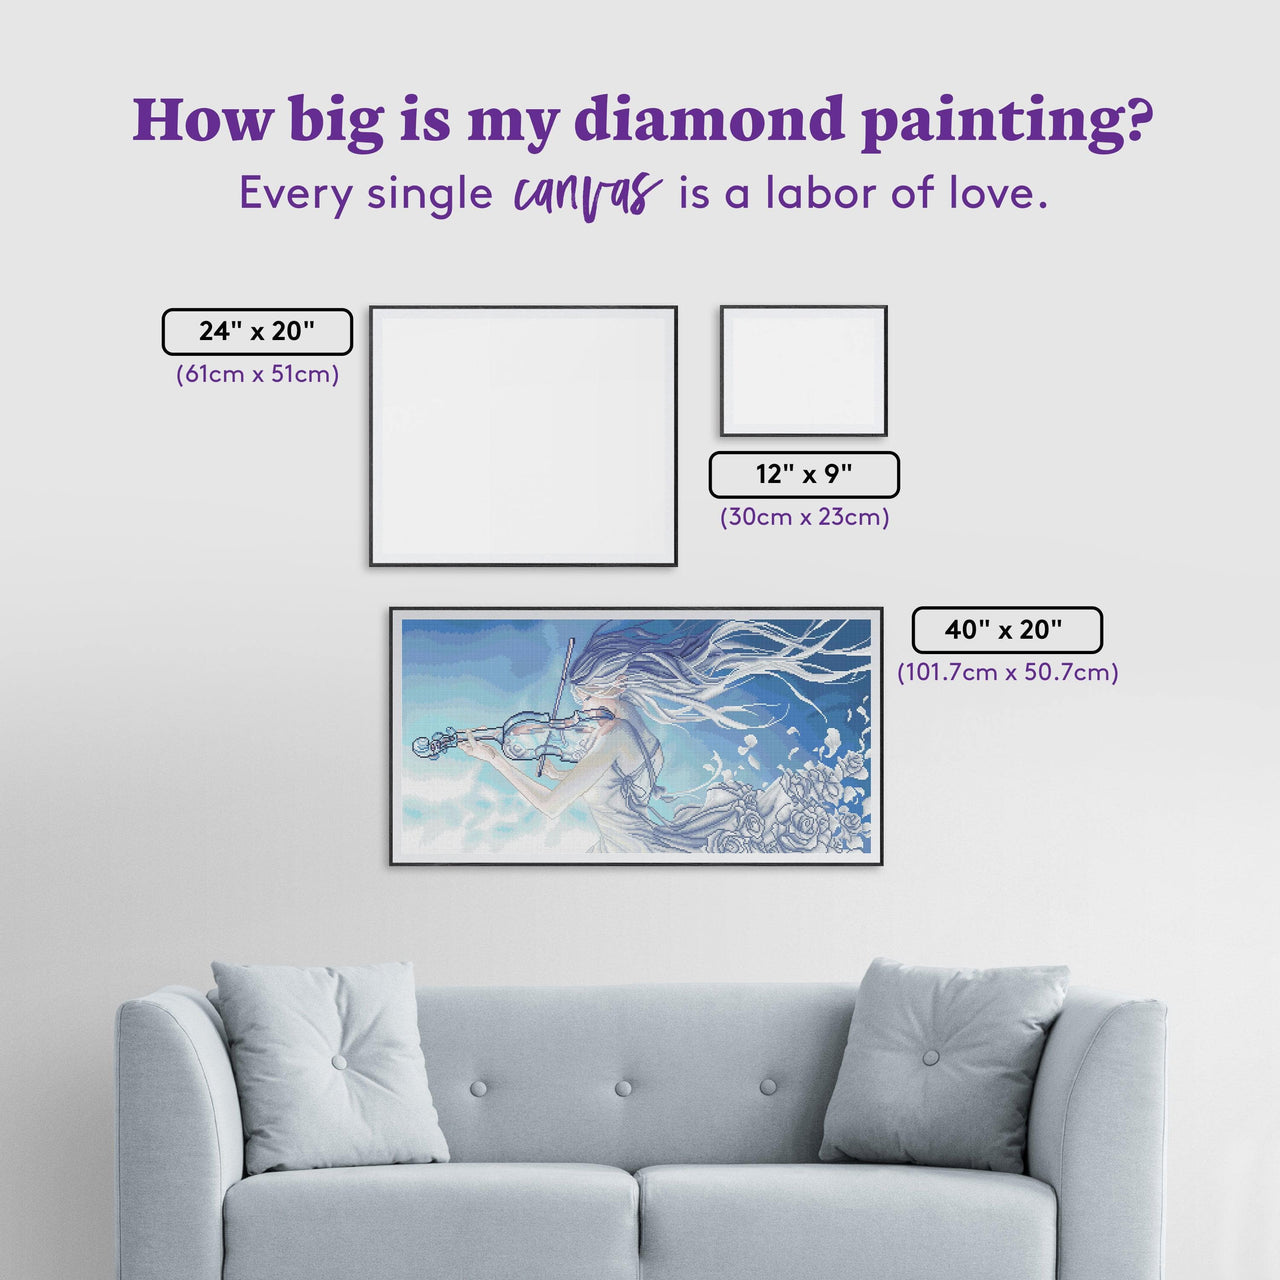 Diamond Painting In This Moment 40" x 20" (101.7cm x 50.7cm) / Round with 37 Colors including 1 ABs & 1 Iridescent Diamonds & 1 Fairy Dust Diamonds / 65,703